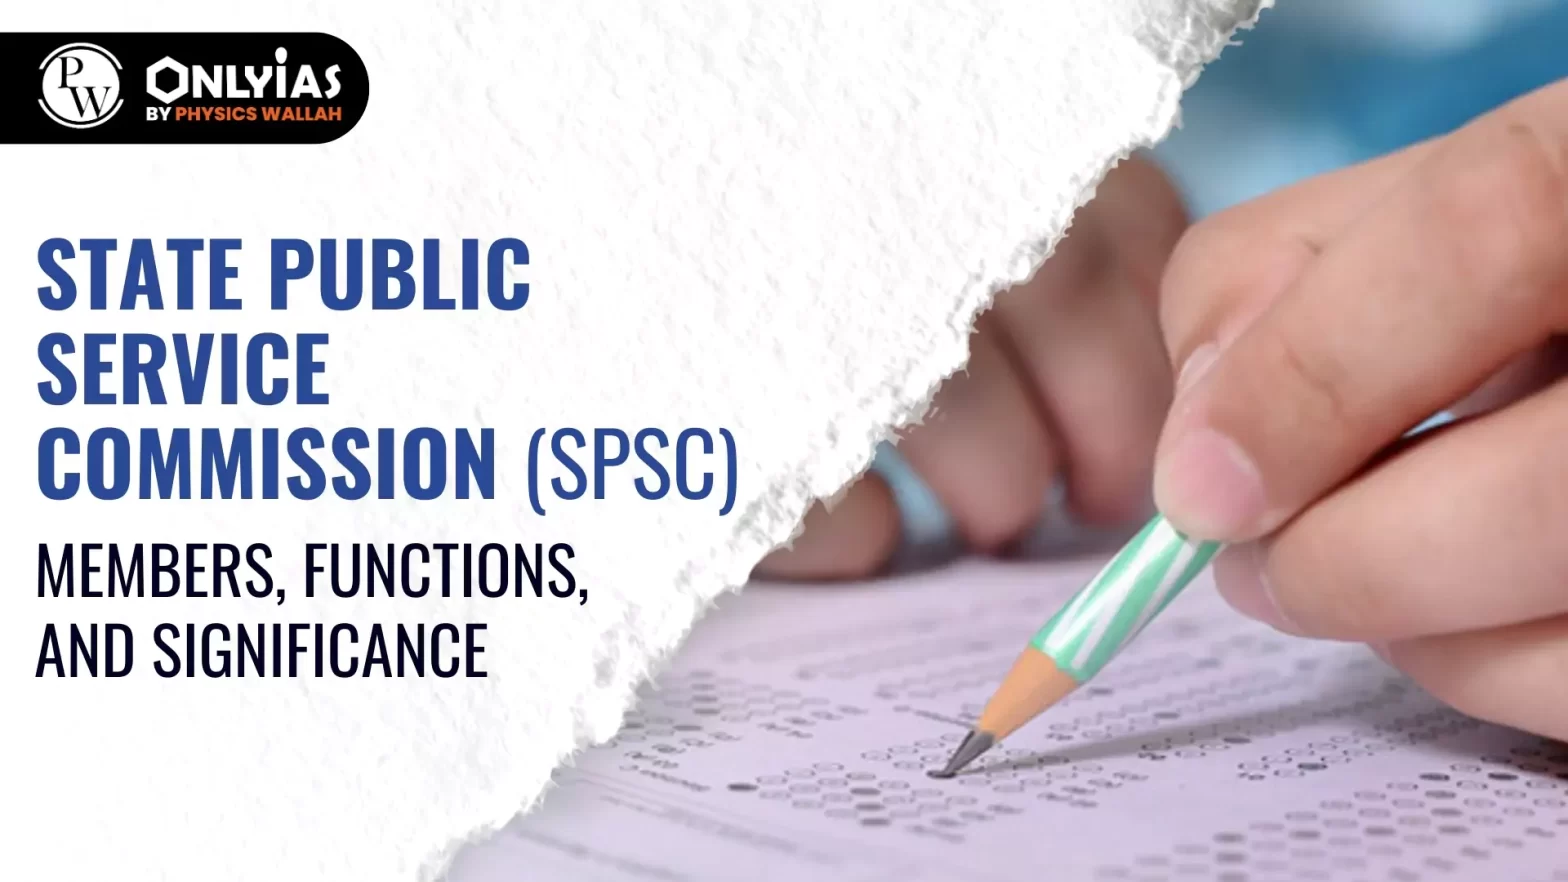 State Public Service Commission (SPSC): Members, Functions, and Significance